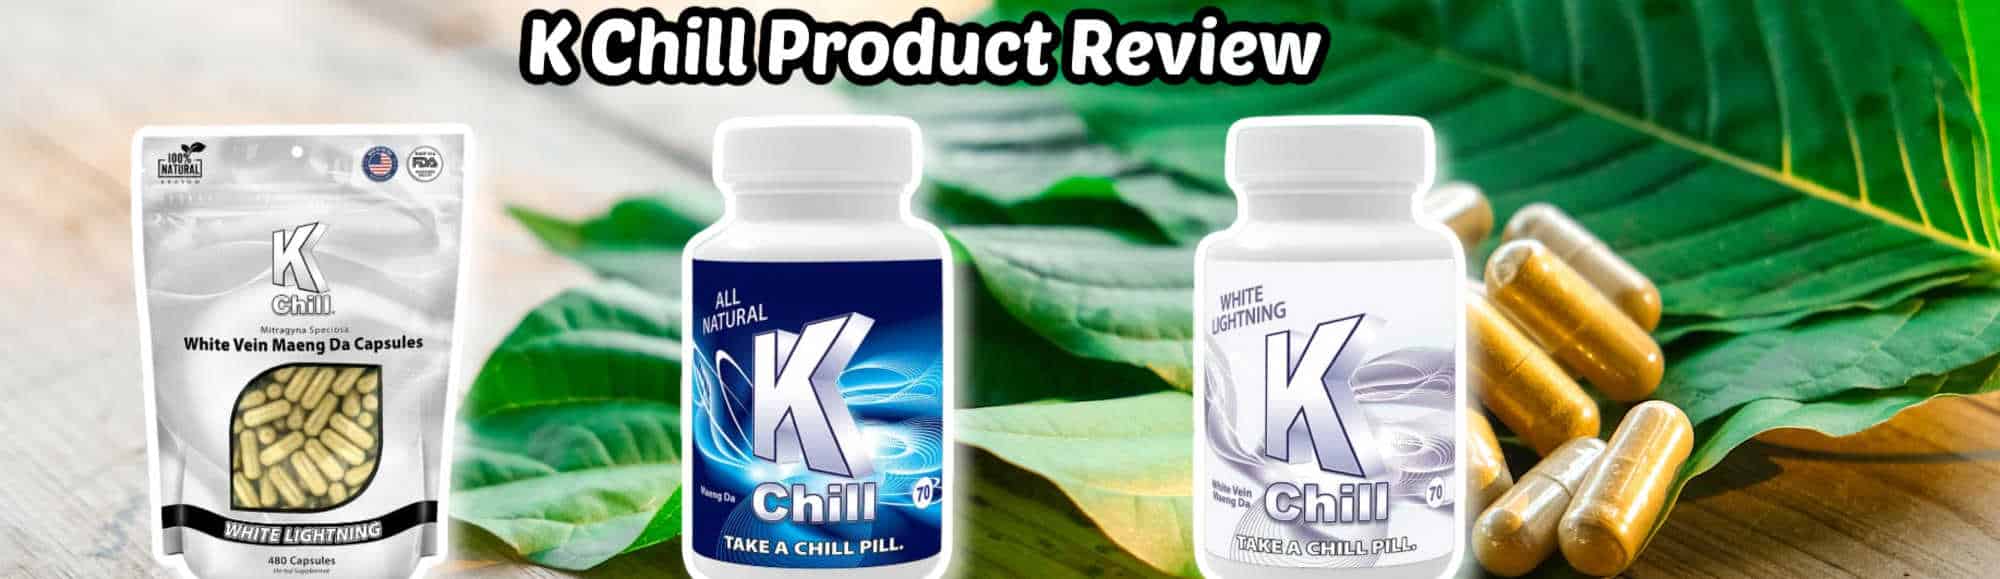 image of k chill product review